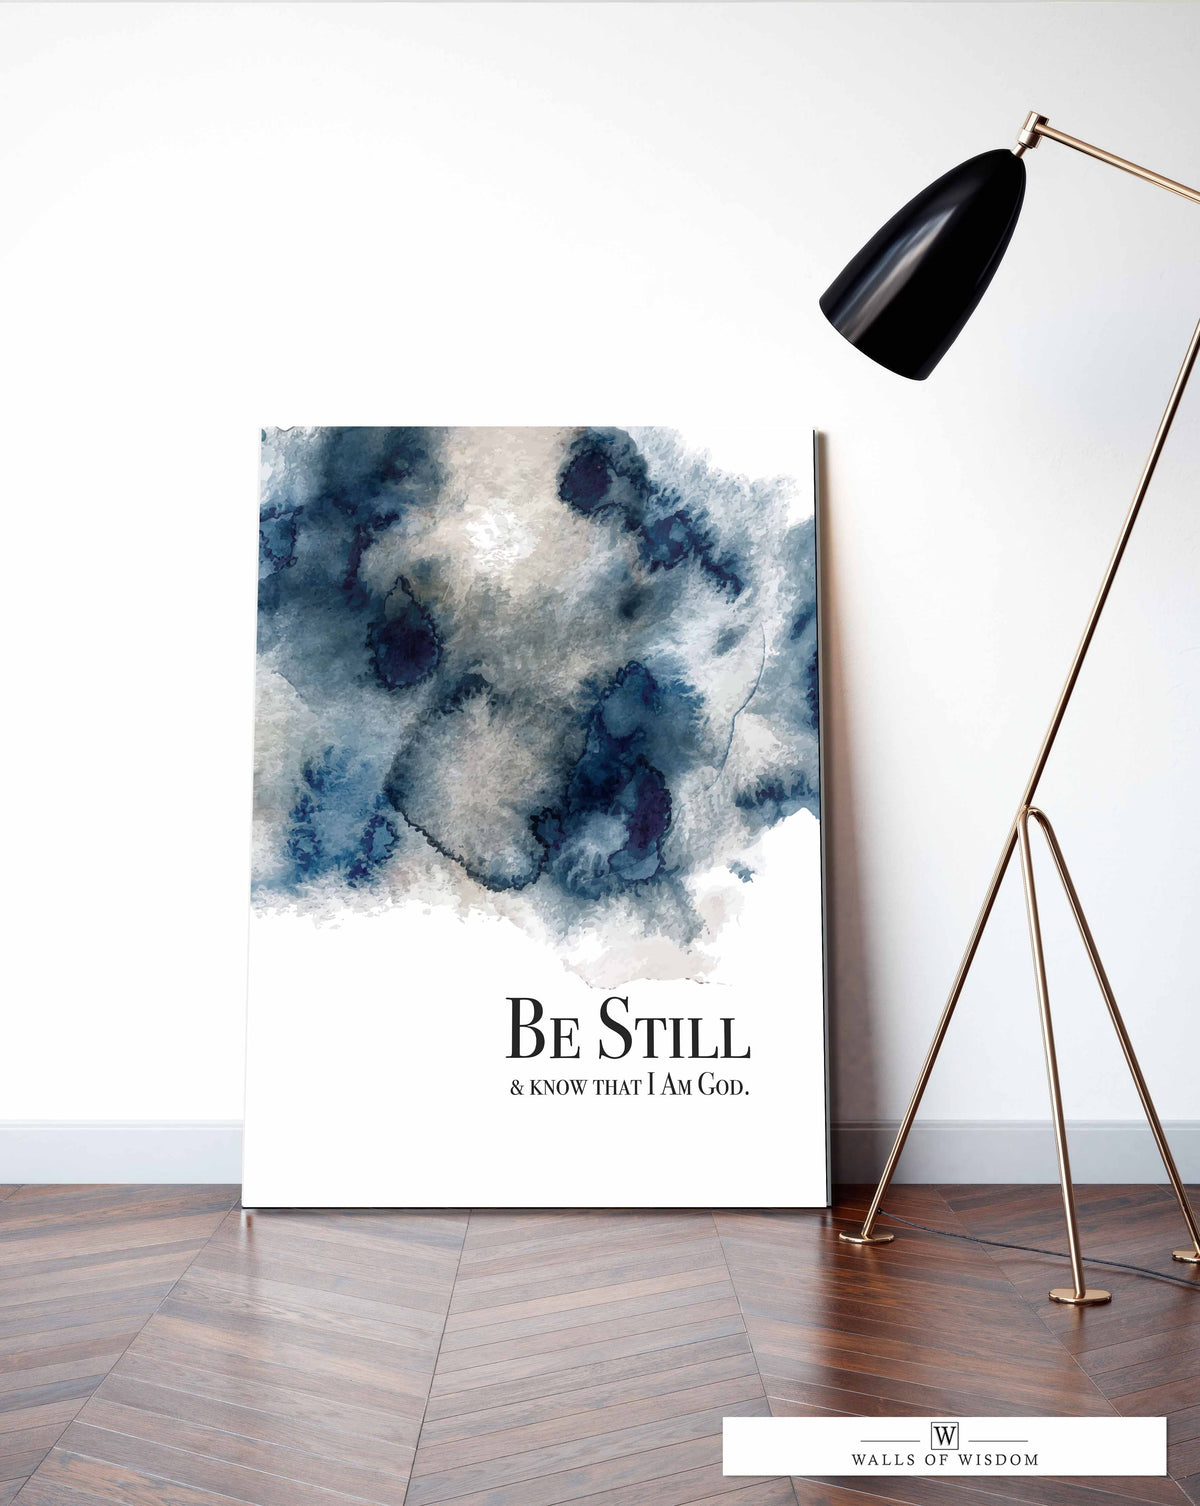 Be Still and Know Blue Watercolor Canvas Wall Art  - Modern Christian Bible Verse Inspirational Wall Decor